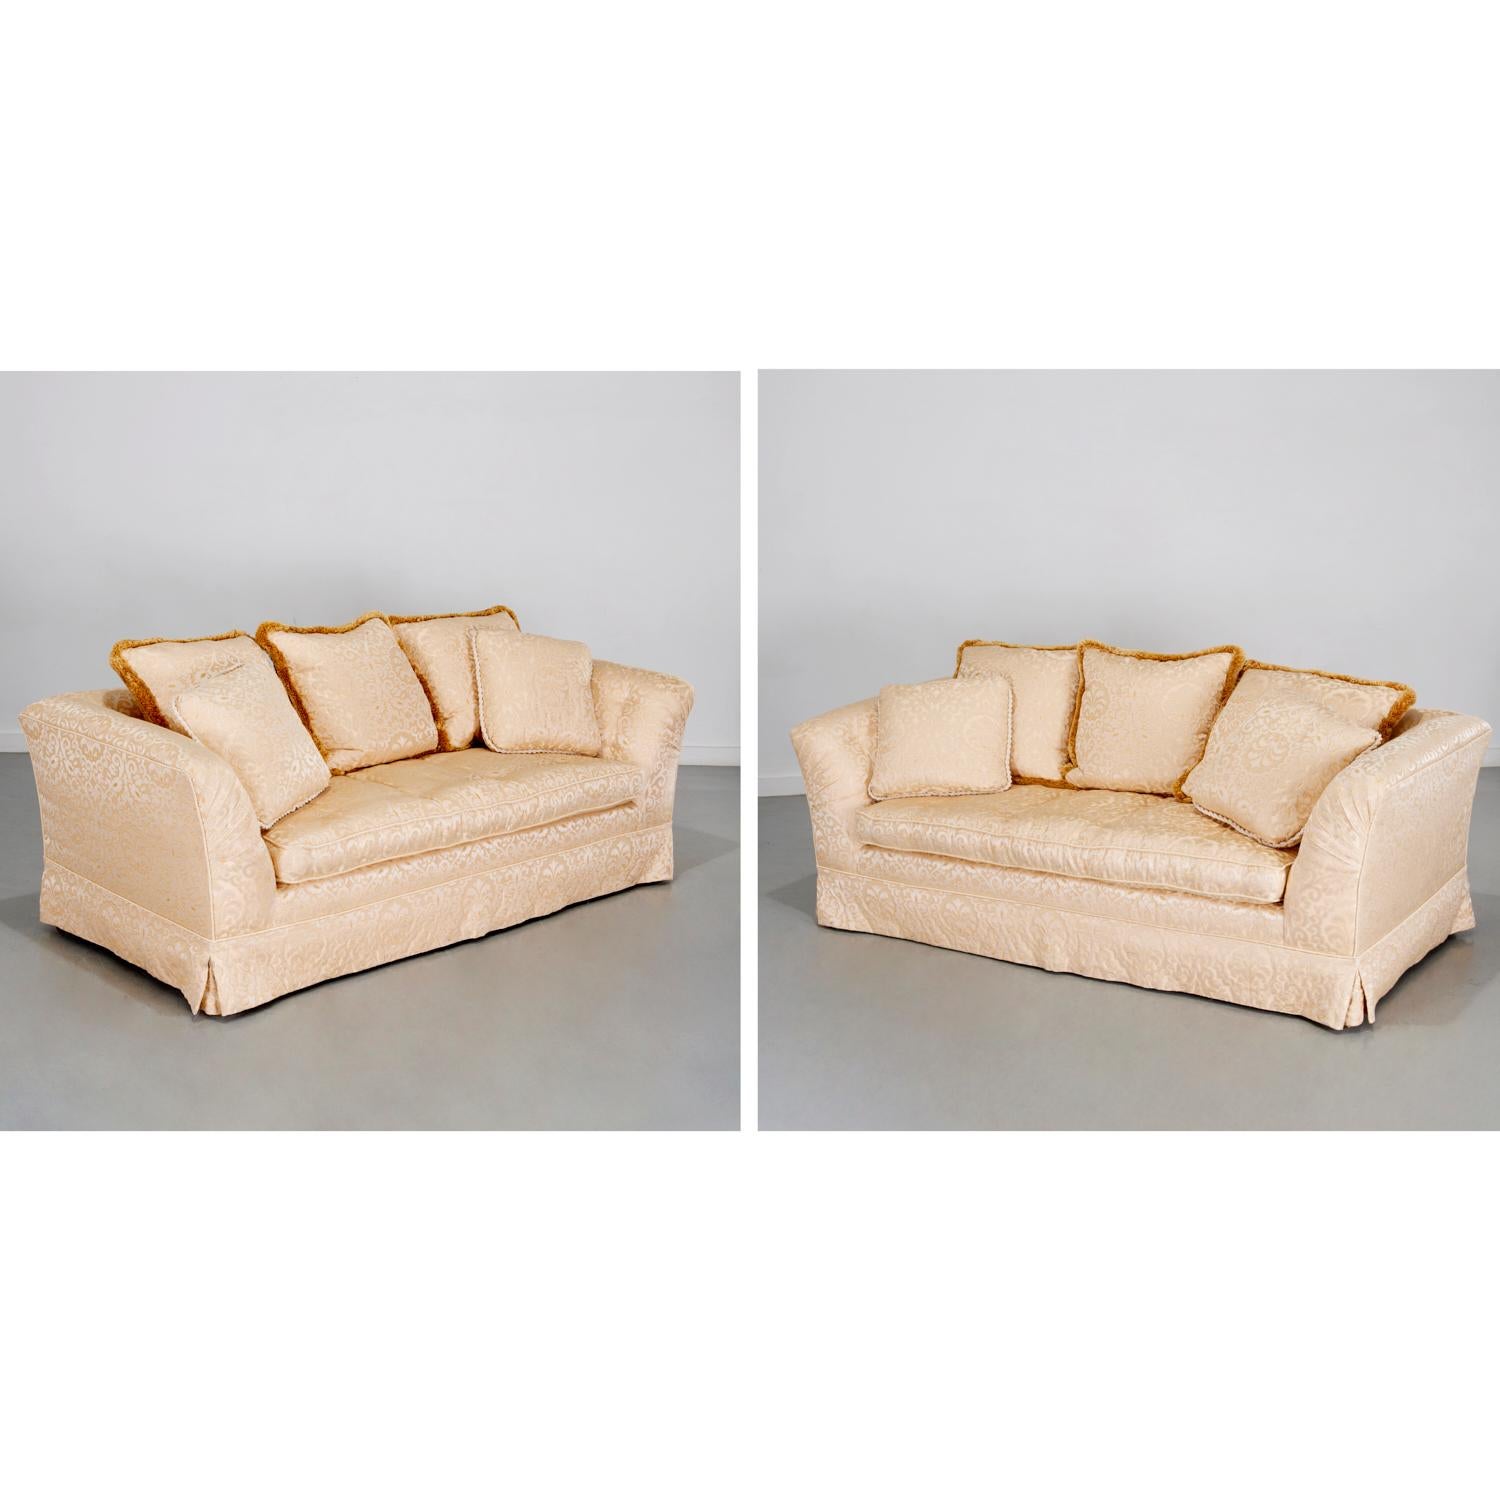 Late 20th c., USA, a pair of custom sumptuous three-seat sofas of squared form with slightly flared arms and tight back. They are upholstered in a cream and champagne silk and cotton damask with a pleated skirt over simple wood legs, unmarked. The